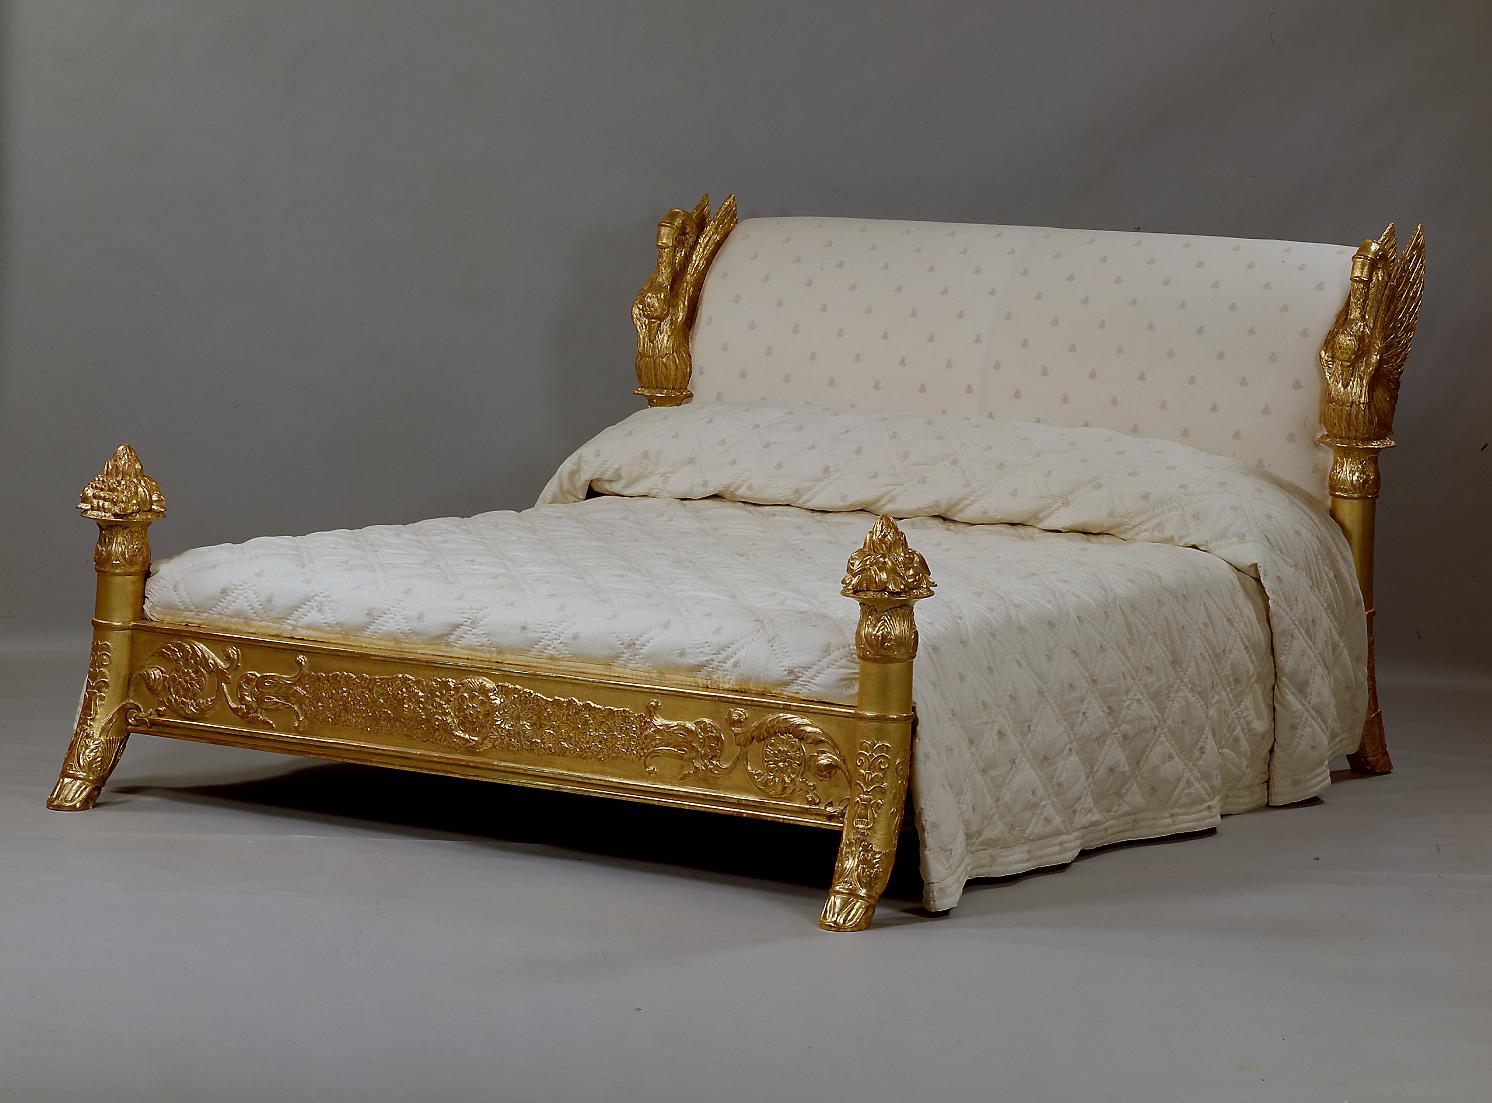 A Majestic Louis-Philippe Giltwood and Gilt Composition King Size Bed, after a model by Francois-Honoré-Georges Jacob-Desmalter, the outwardly curved headboard flanked by two open-winged swans on foliate cornucopia supports ending in hoof-feet, the